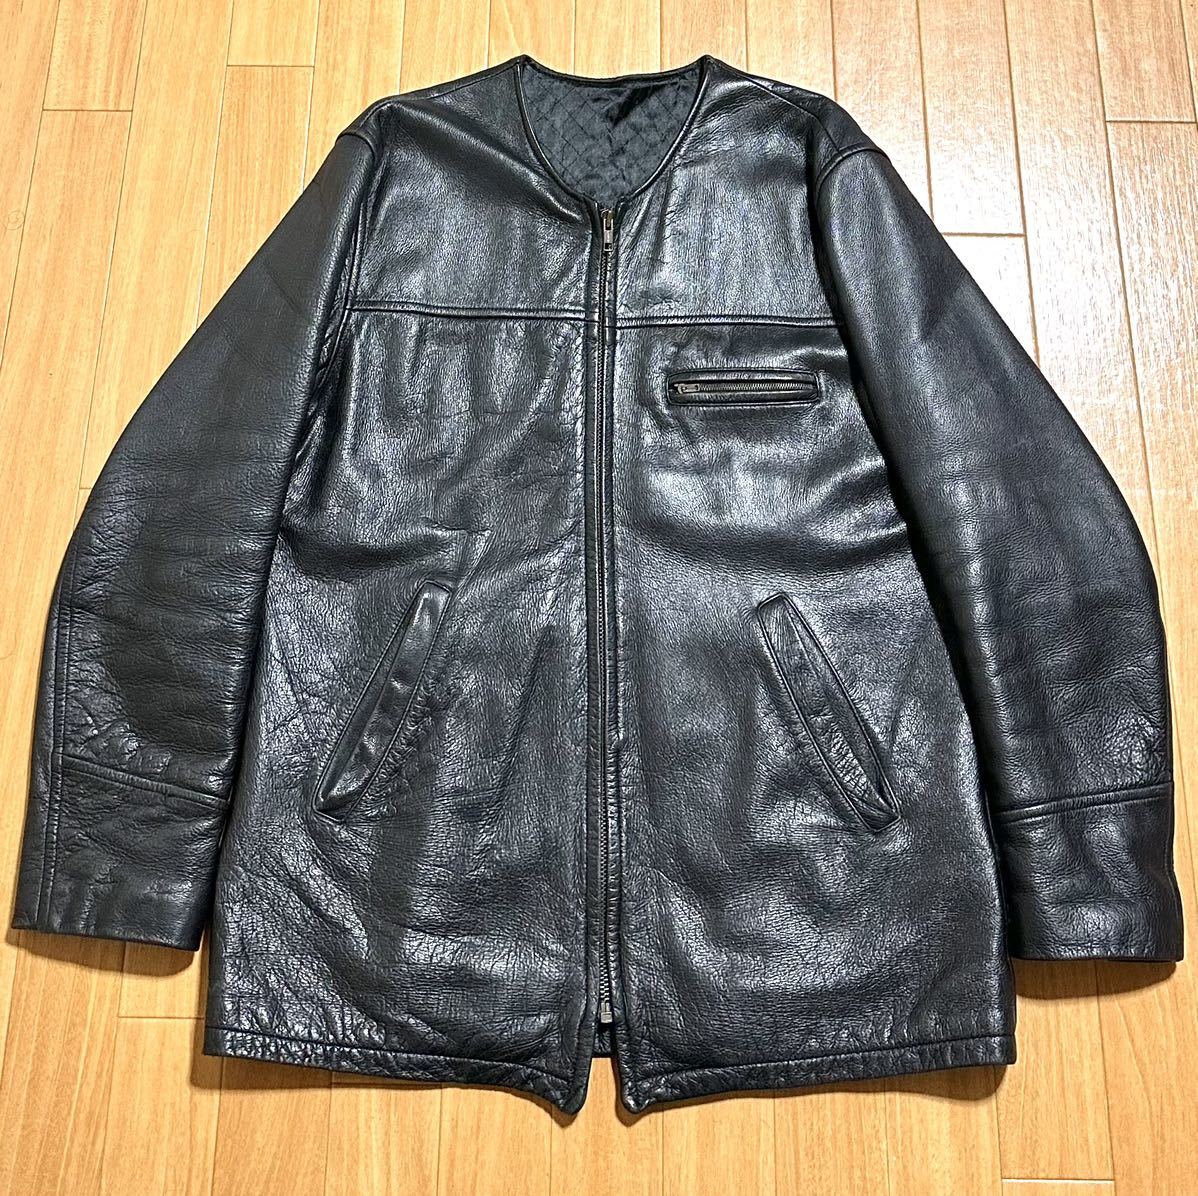 undercover 1996aw Wire期 ノーカラー レザージャケット ジップブルゾン コート アンダーカバー 96aw scab oneoff archive one and only_画像1